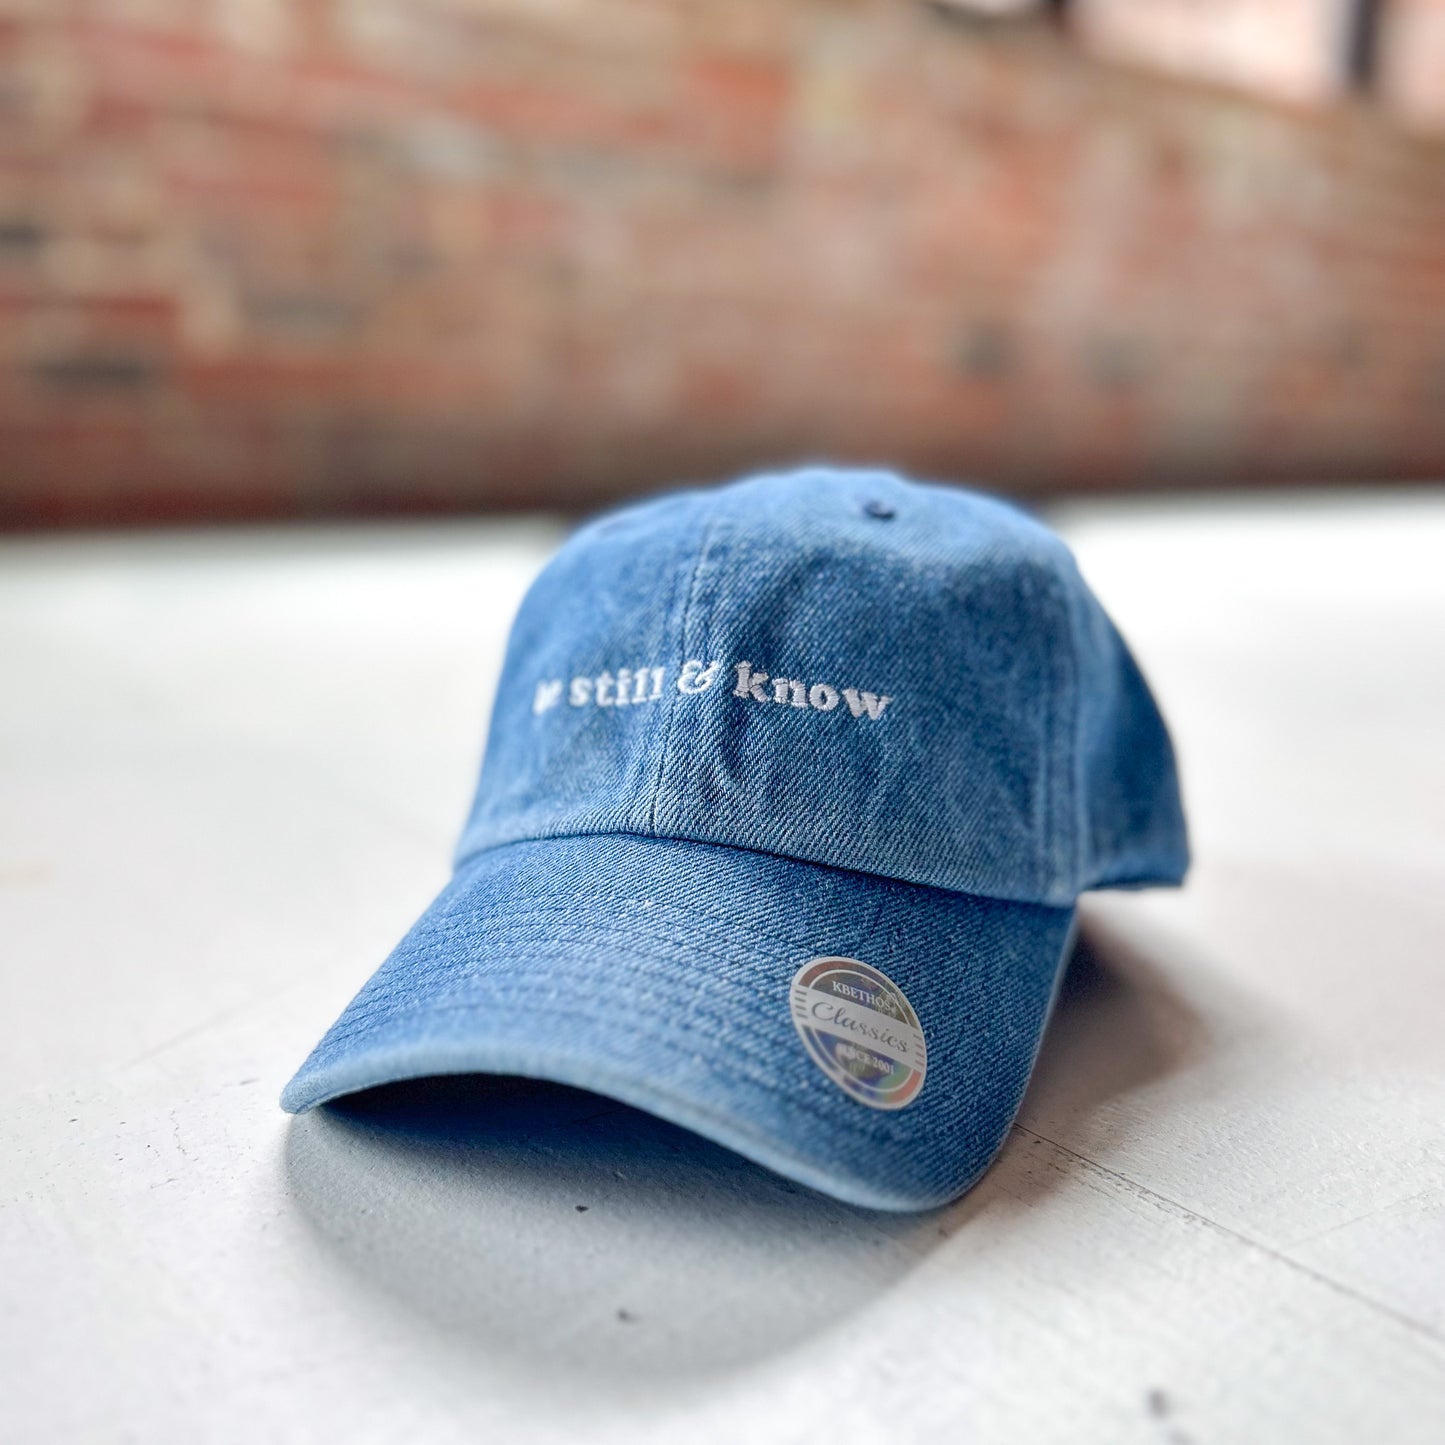 Be Still & Know Hat (Non-Distressed)